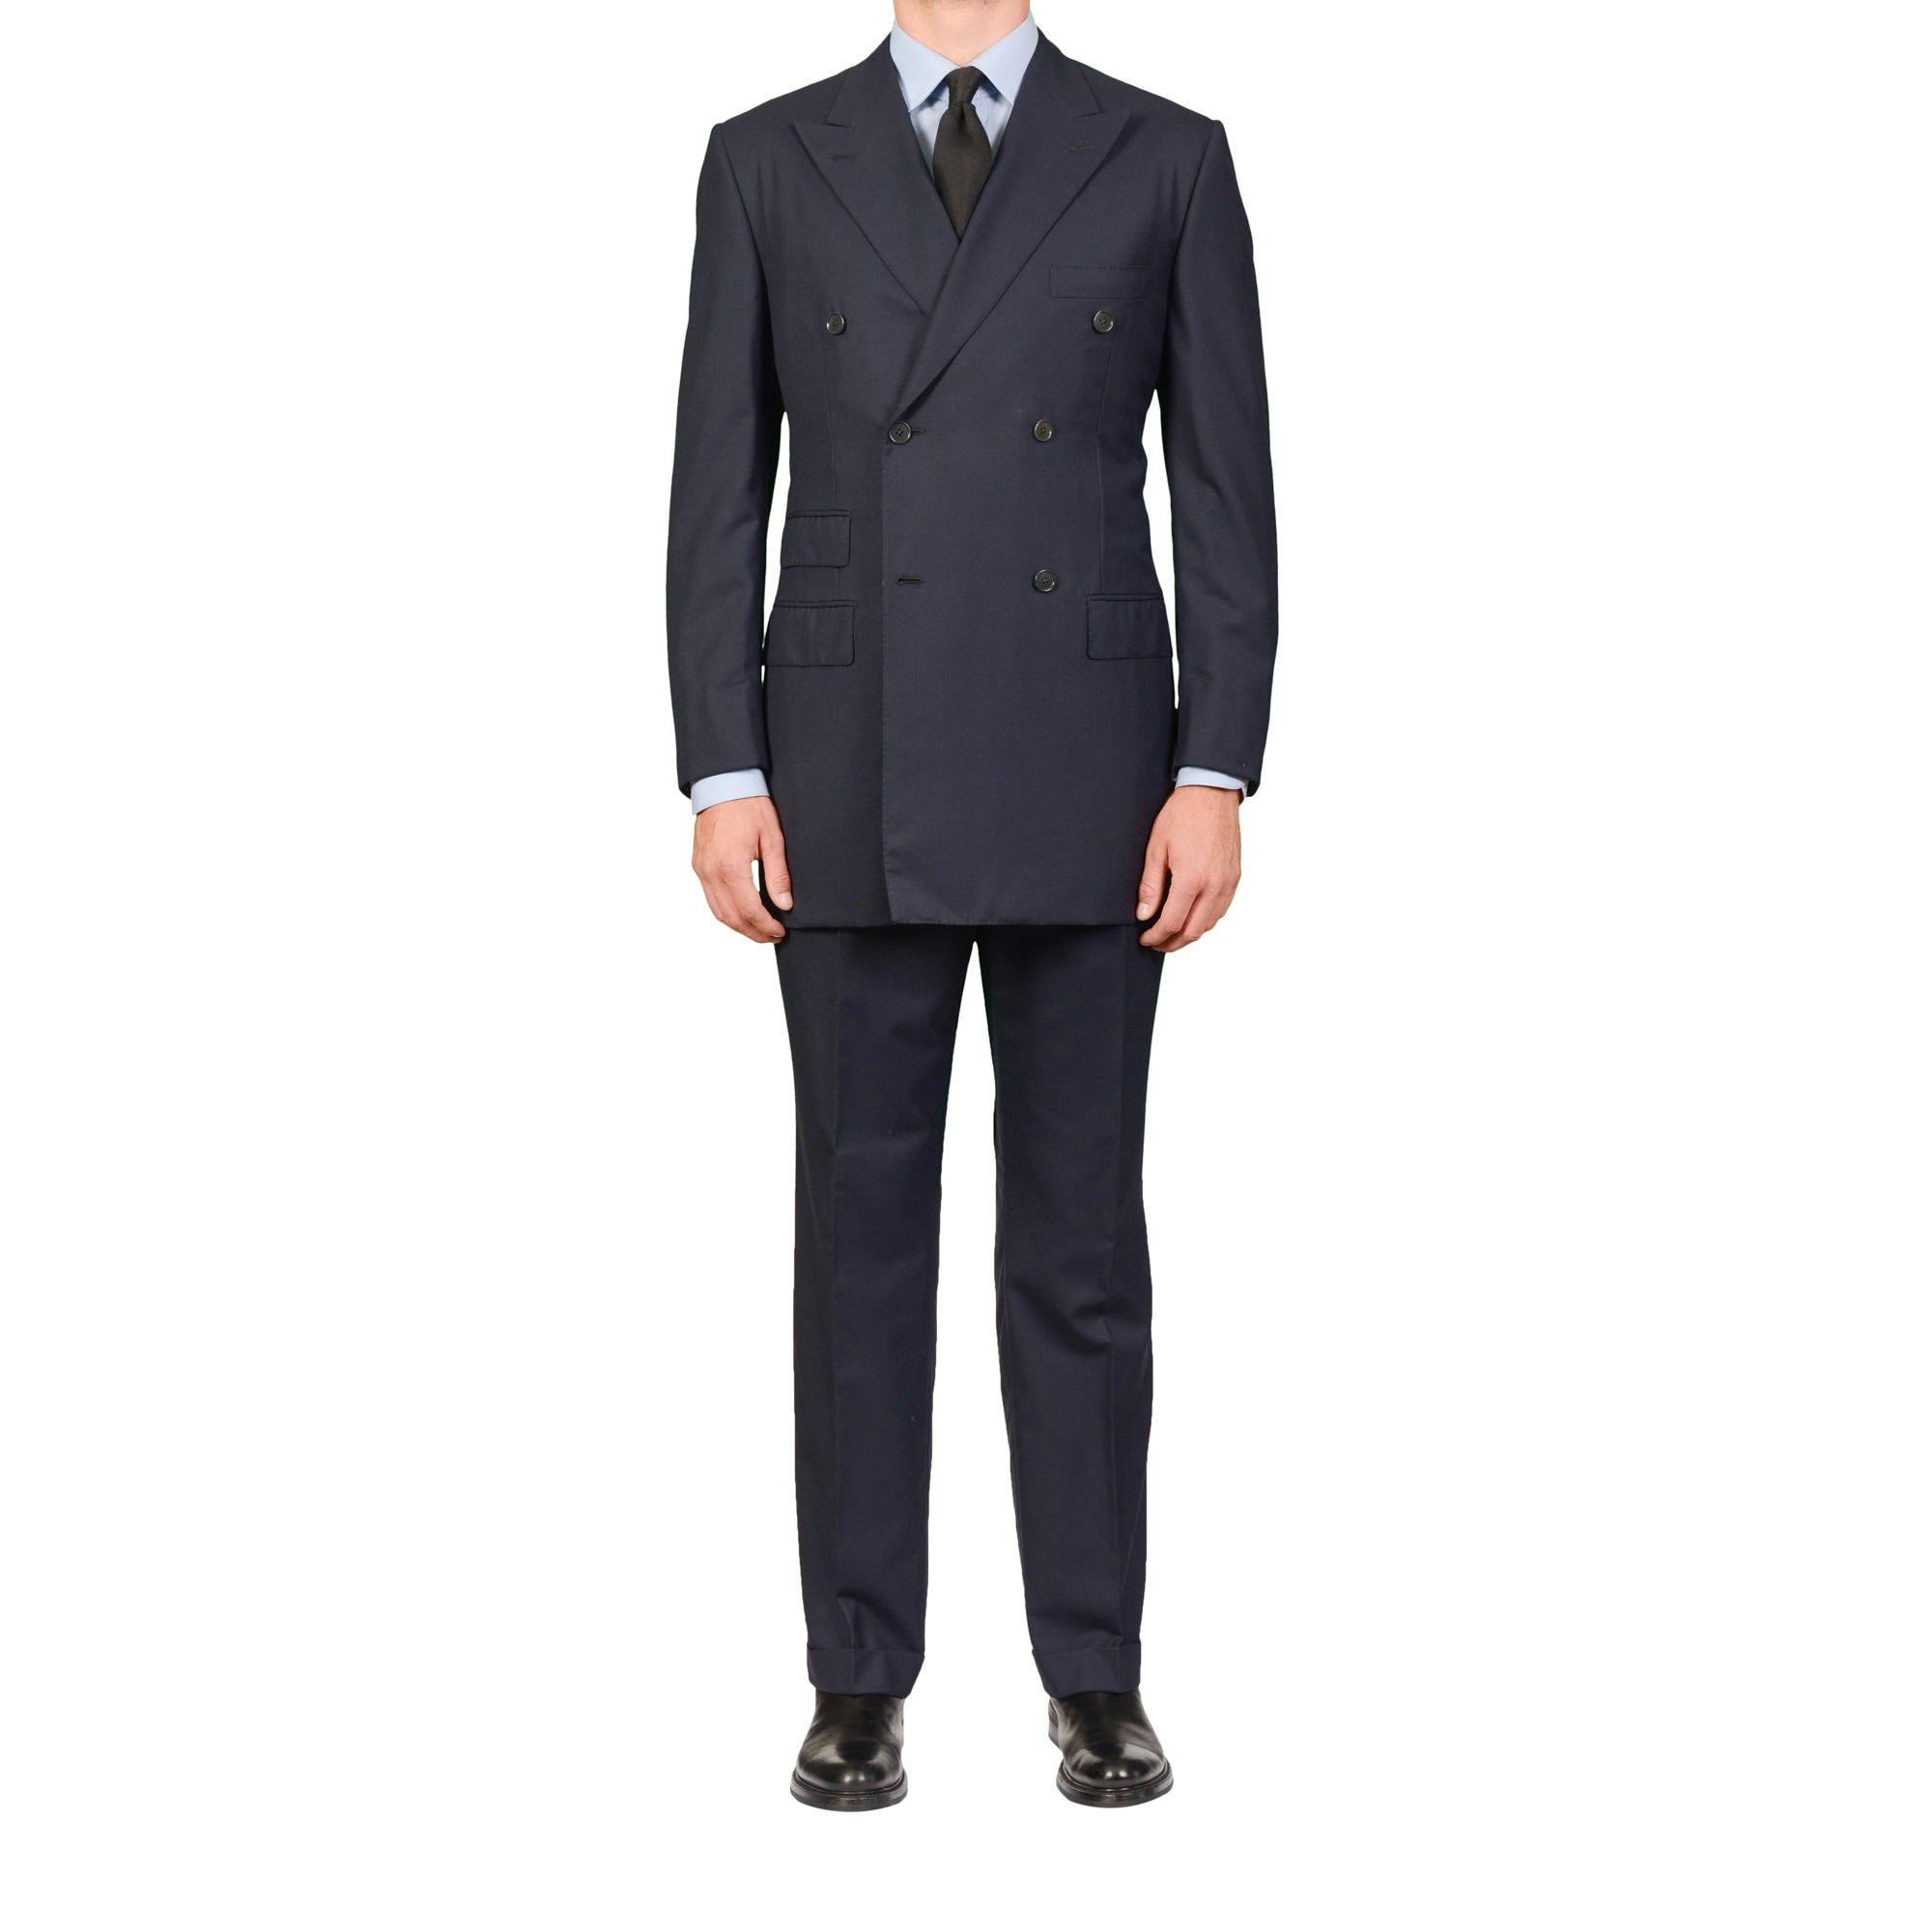 GIEVES & HAWKES Navy Blue Textured Wool Super 150's DB Suit 51 NEW US 41 Long GIEVES & HAWKES